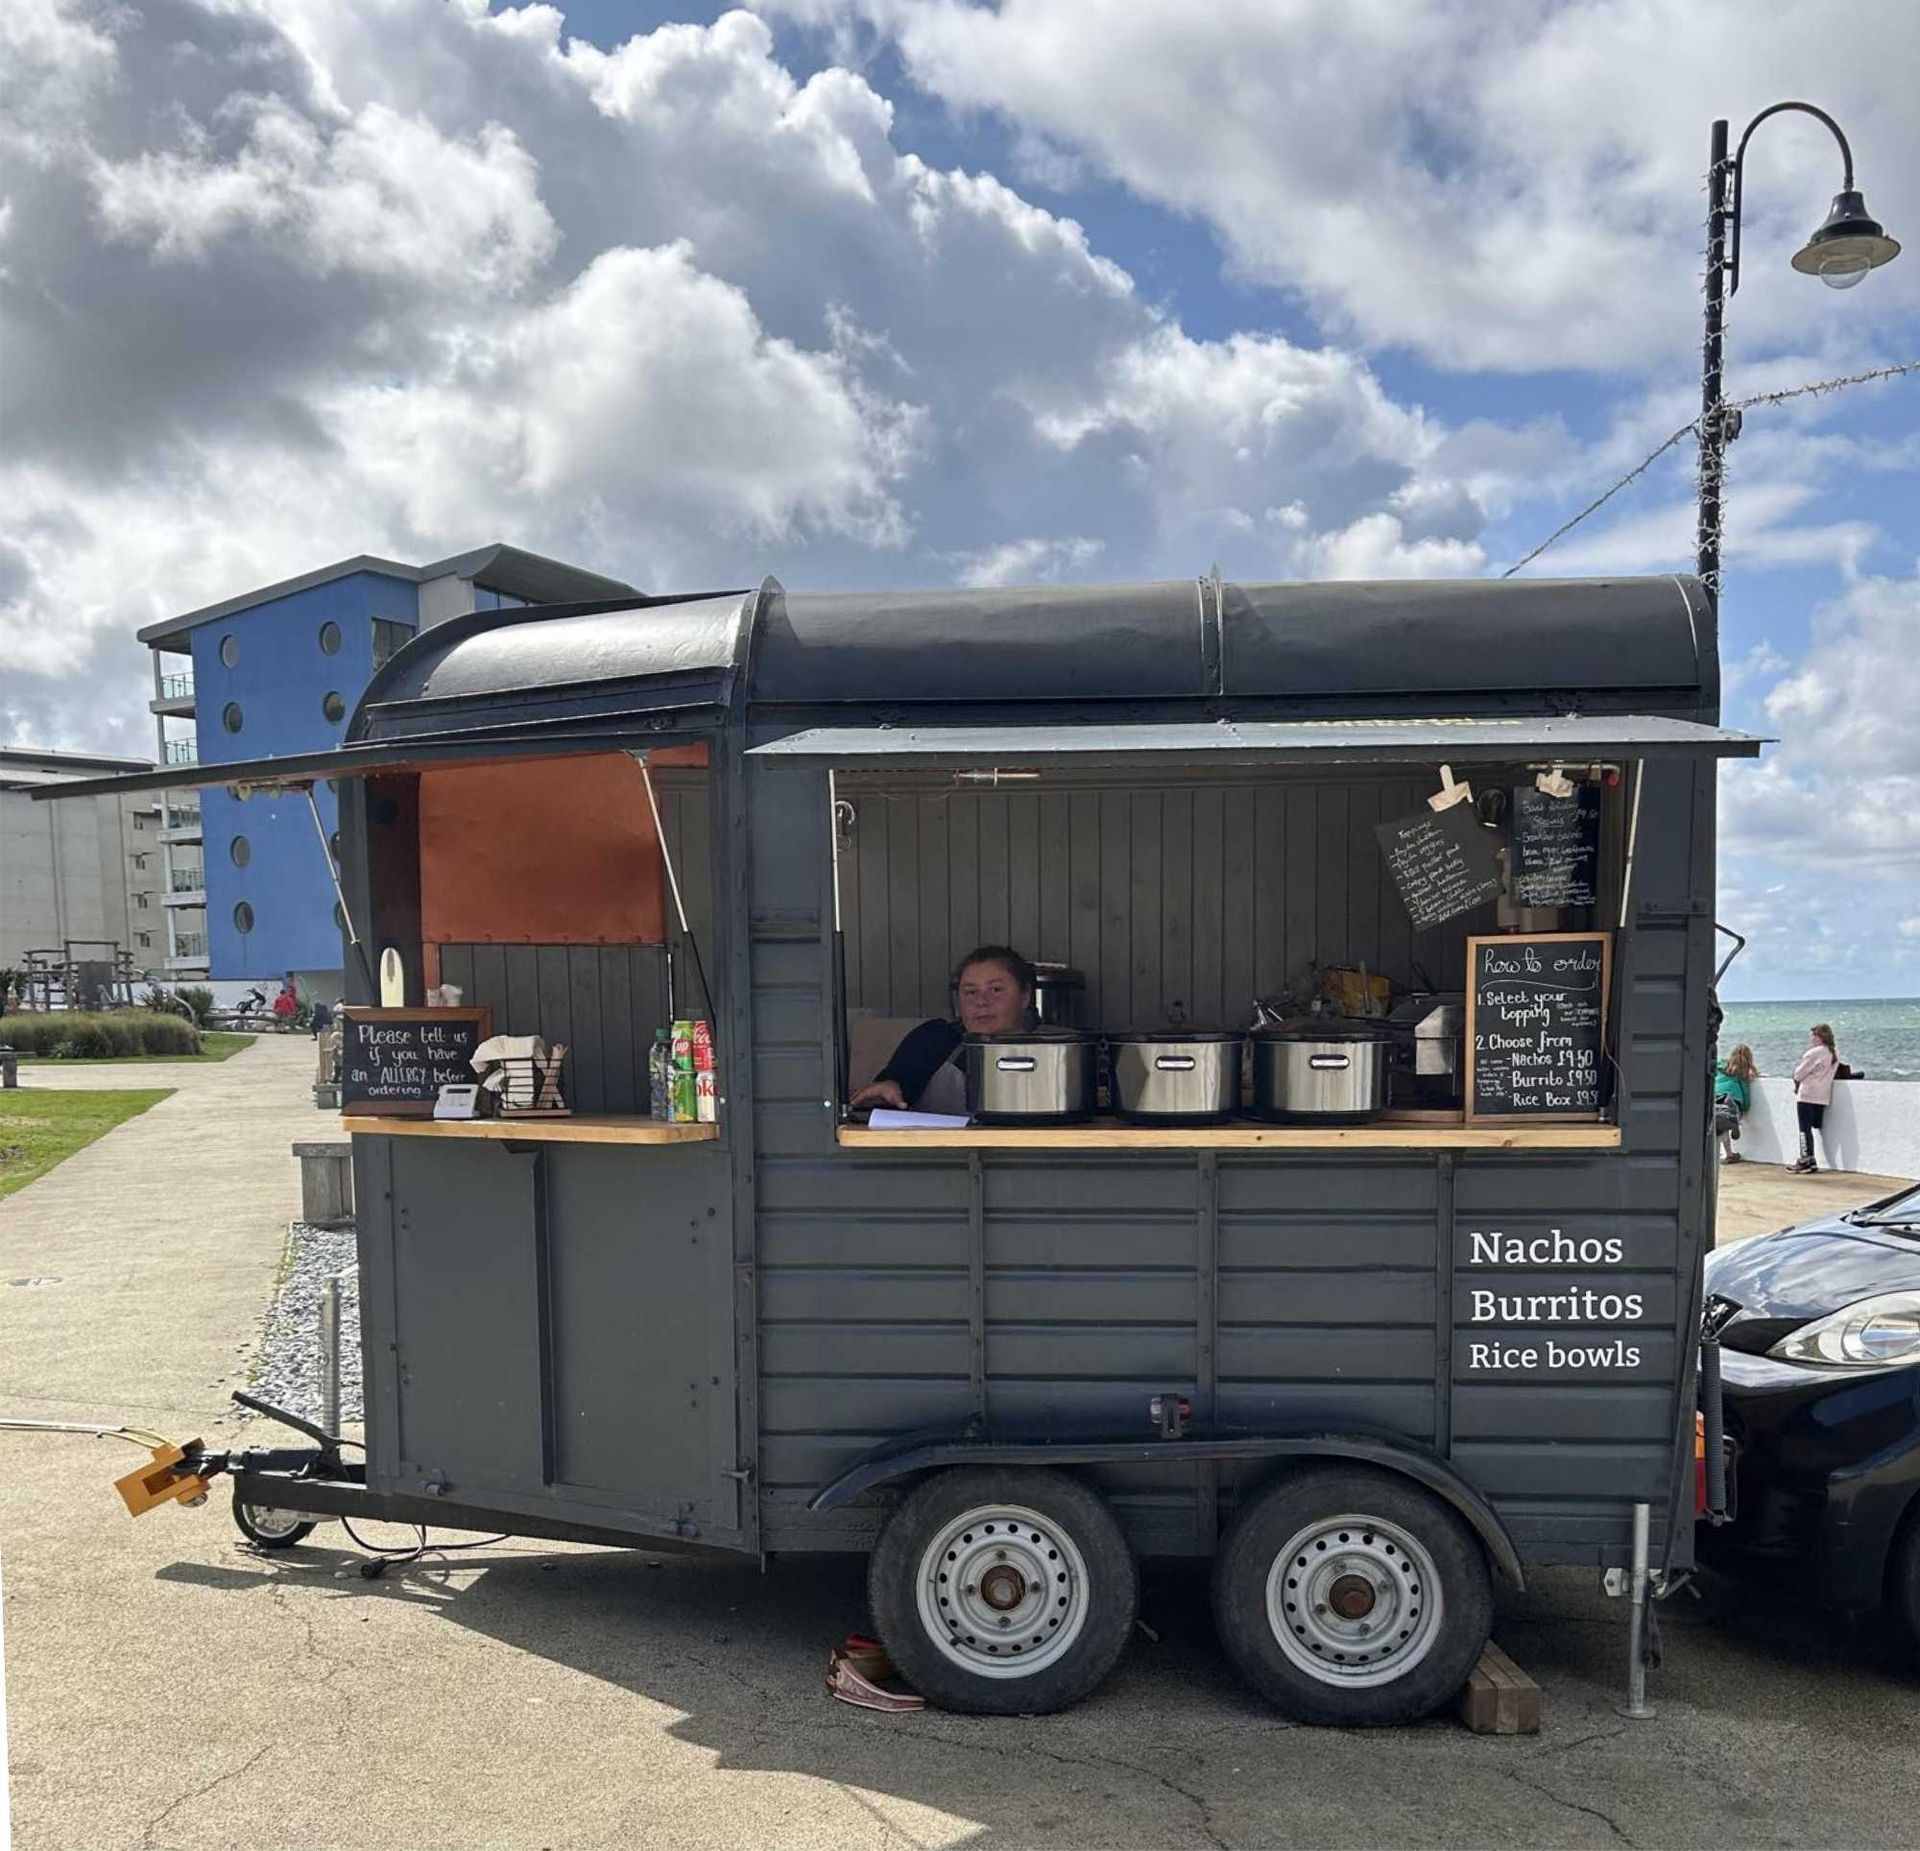 Nach Ho! is a Mexican food trailer in the centre of Westward Ho!